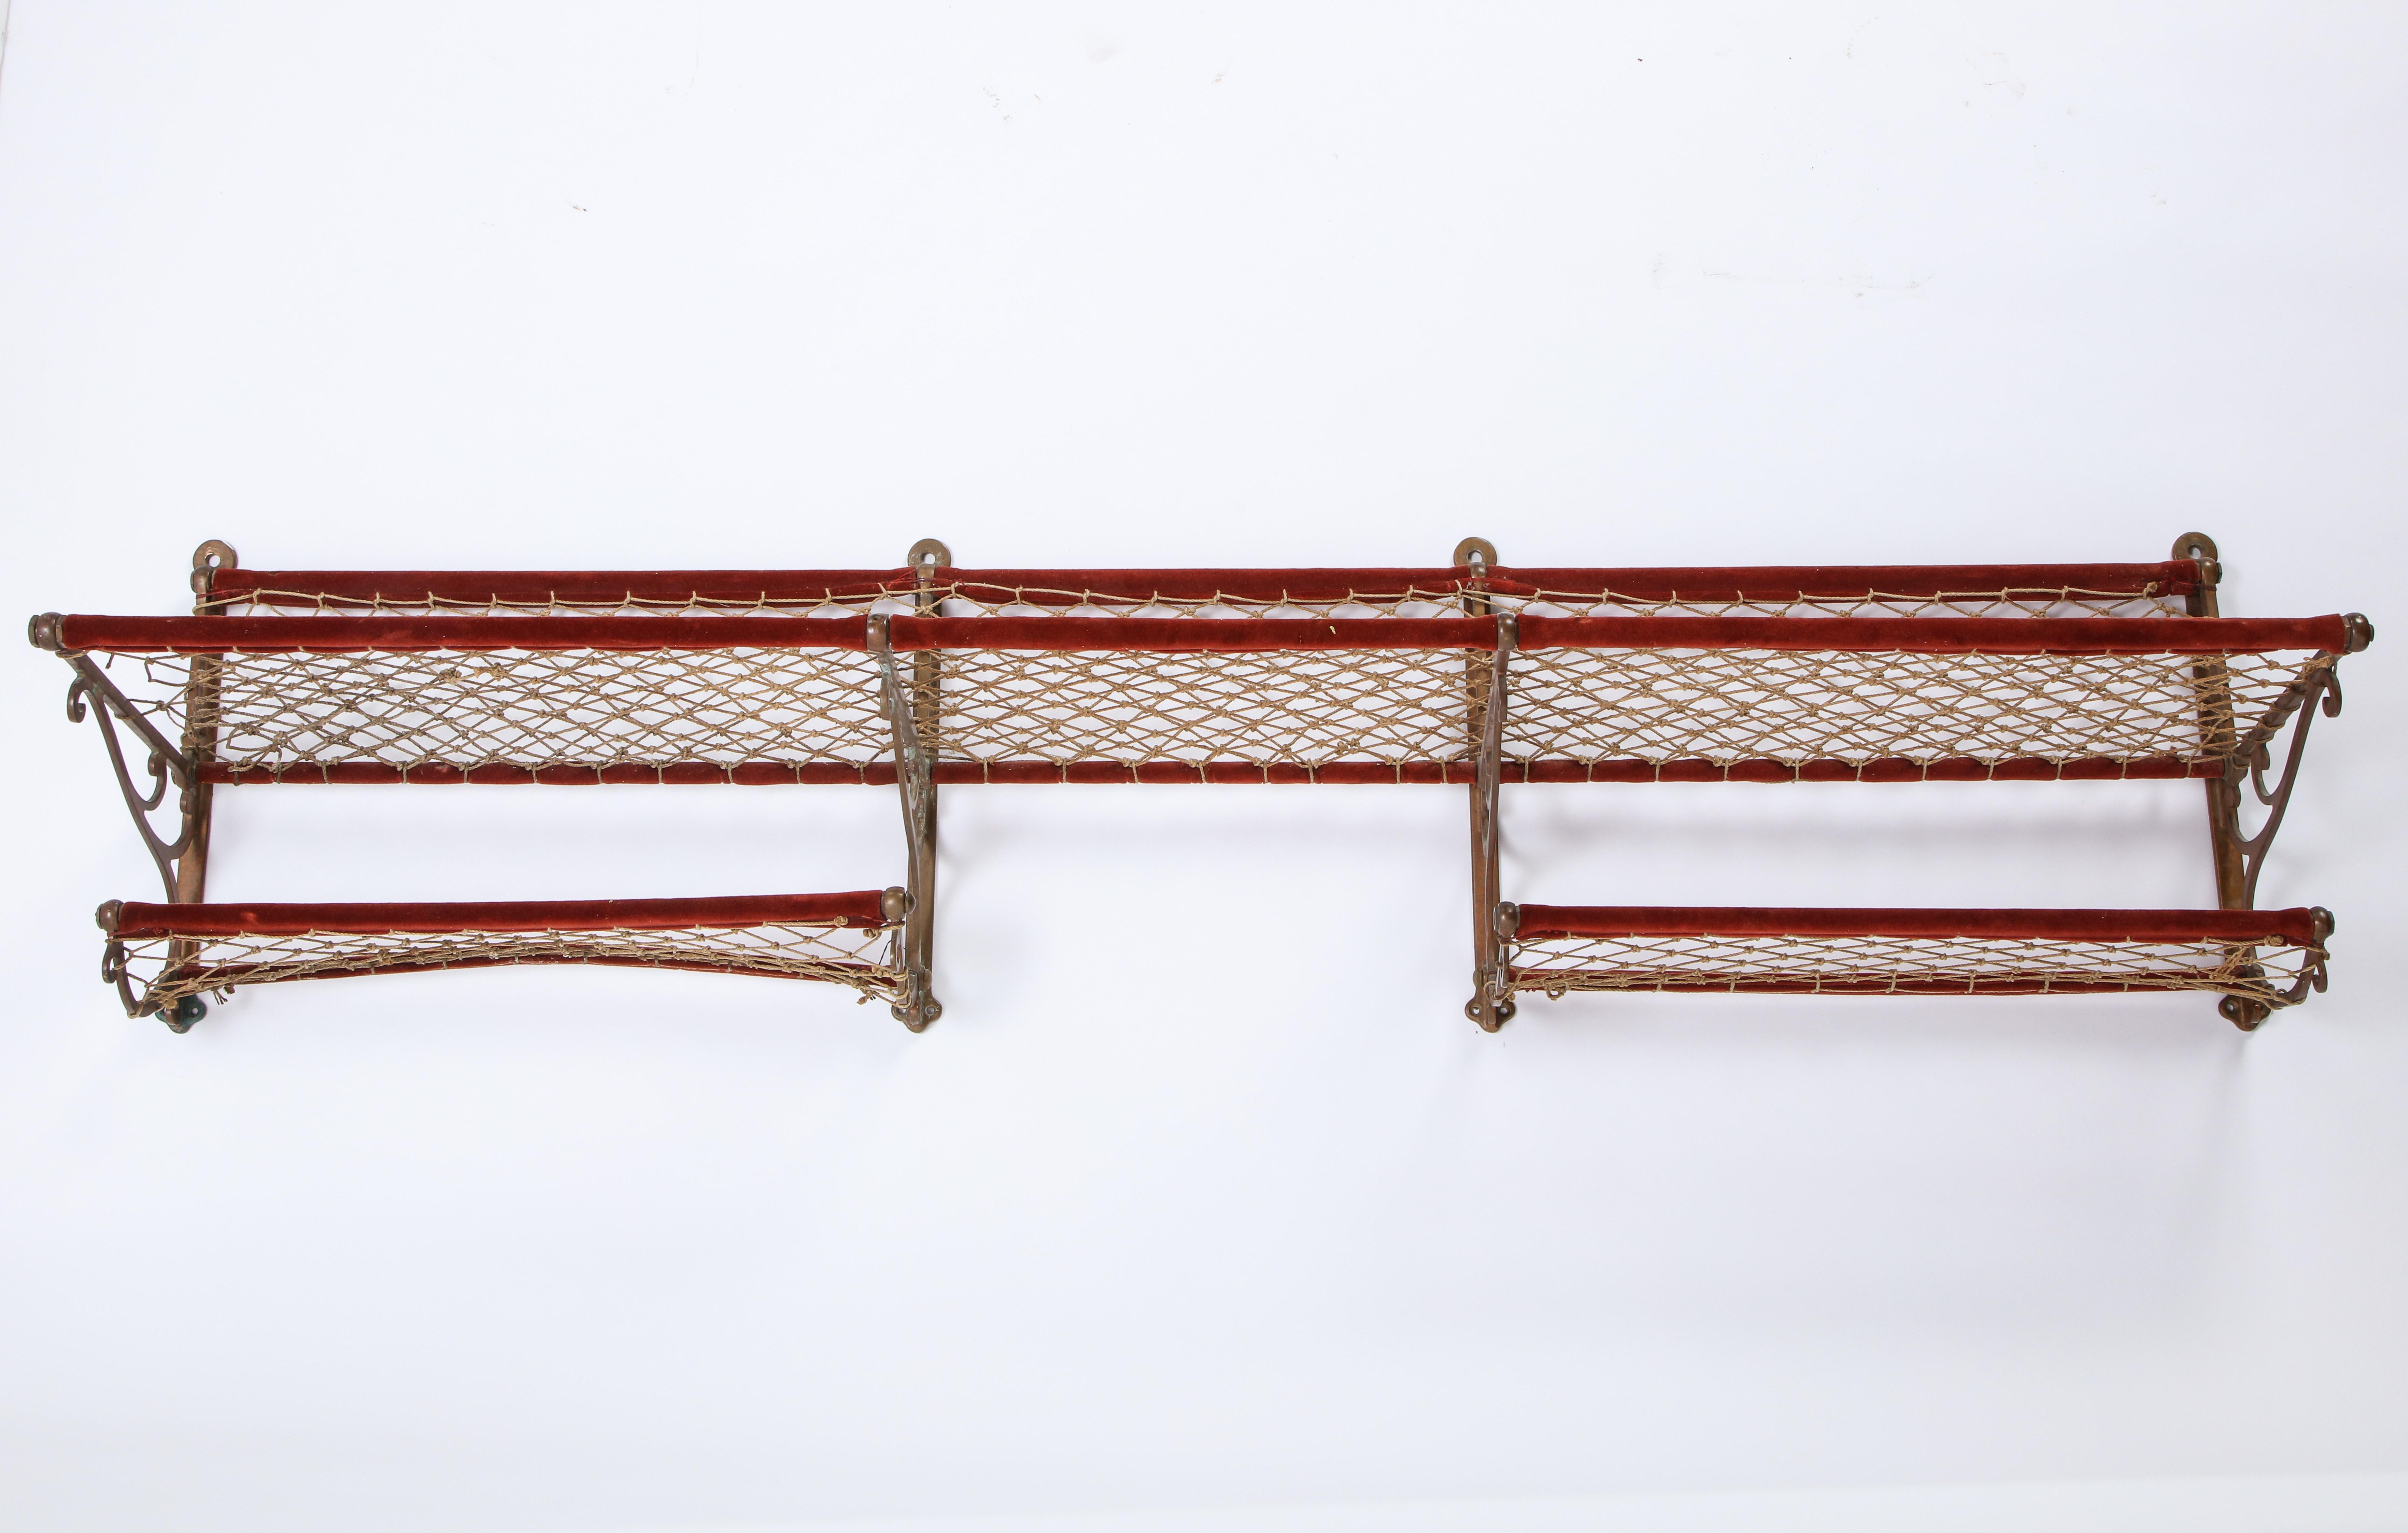 This large metal luggage rack with red plush trimming and netting probably dates to the early 20th century. Tracing its ties to a European train, this piece is both functional and decorative, adding a late Victorian flair to any room. Choose to add